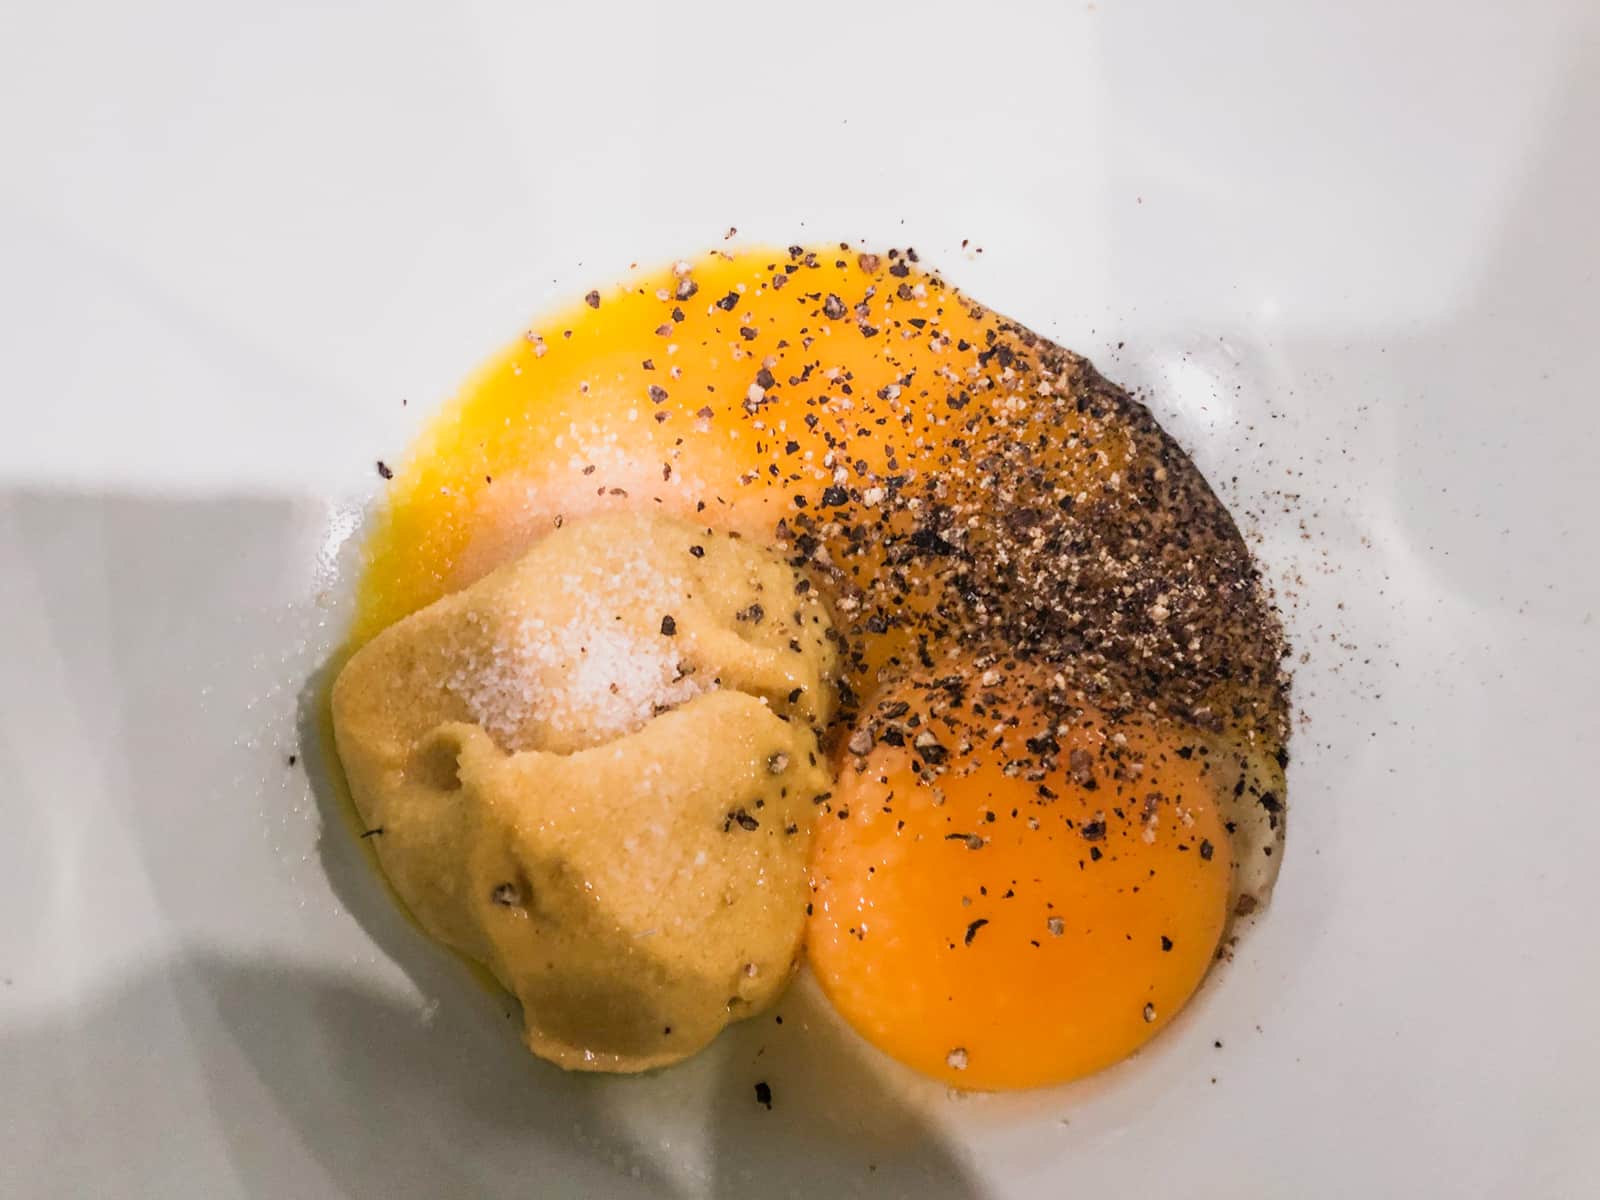 Egg yolks mixed mustard in a bowl.